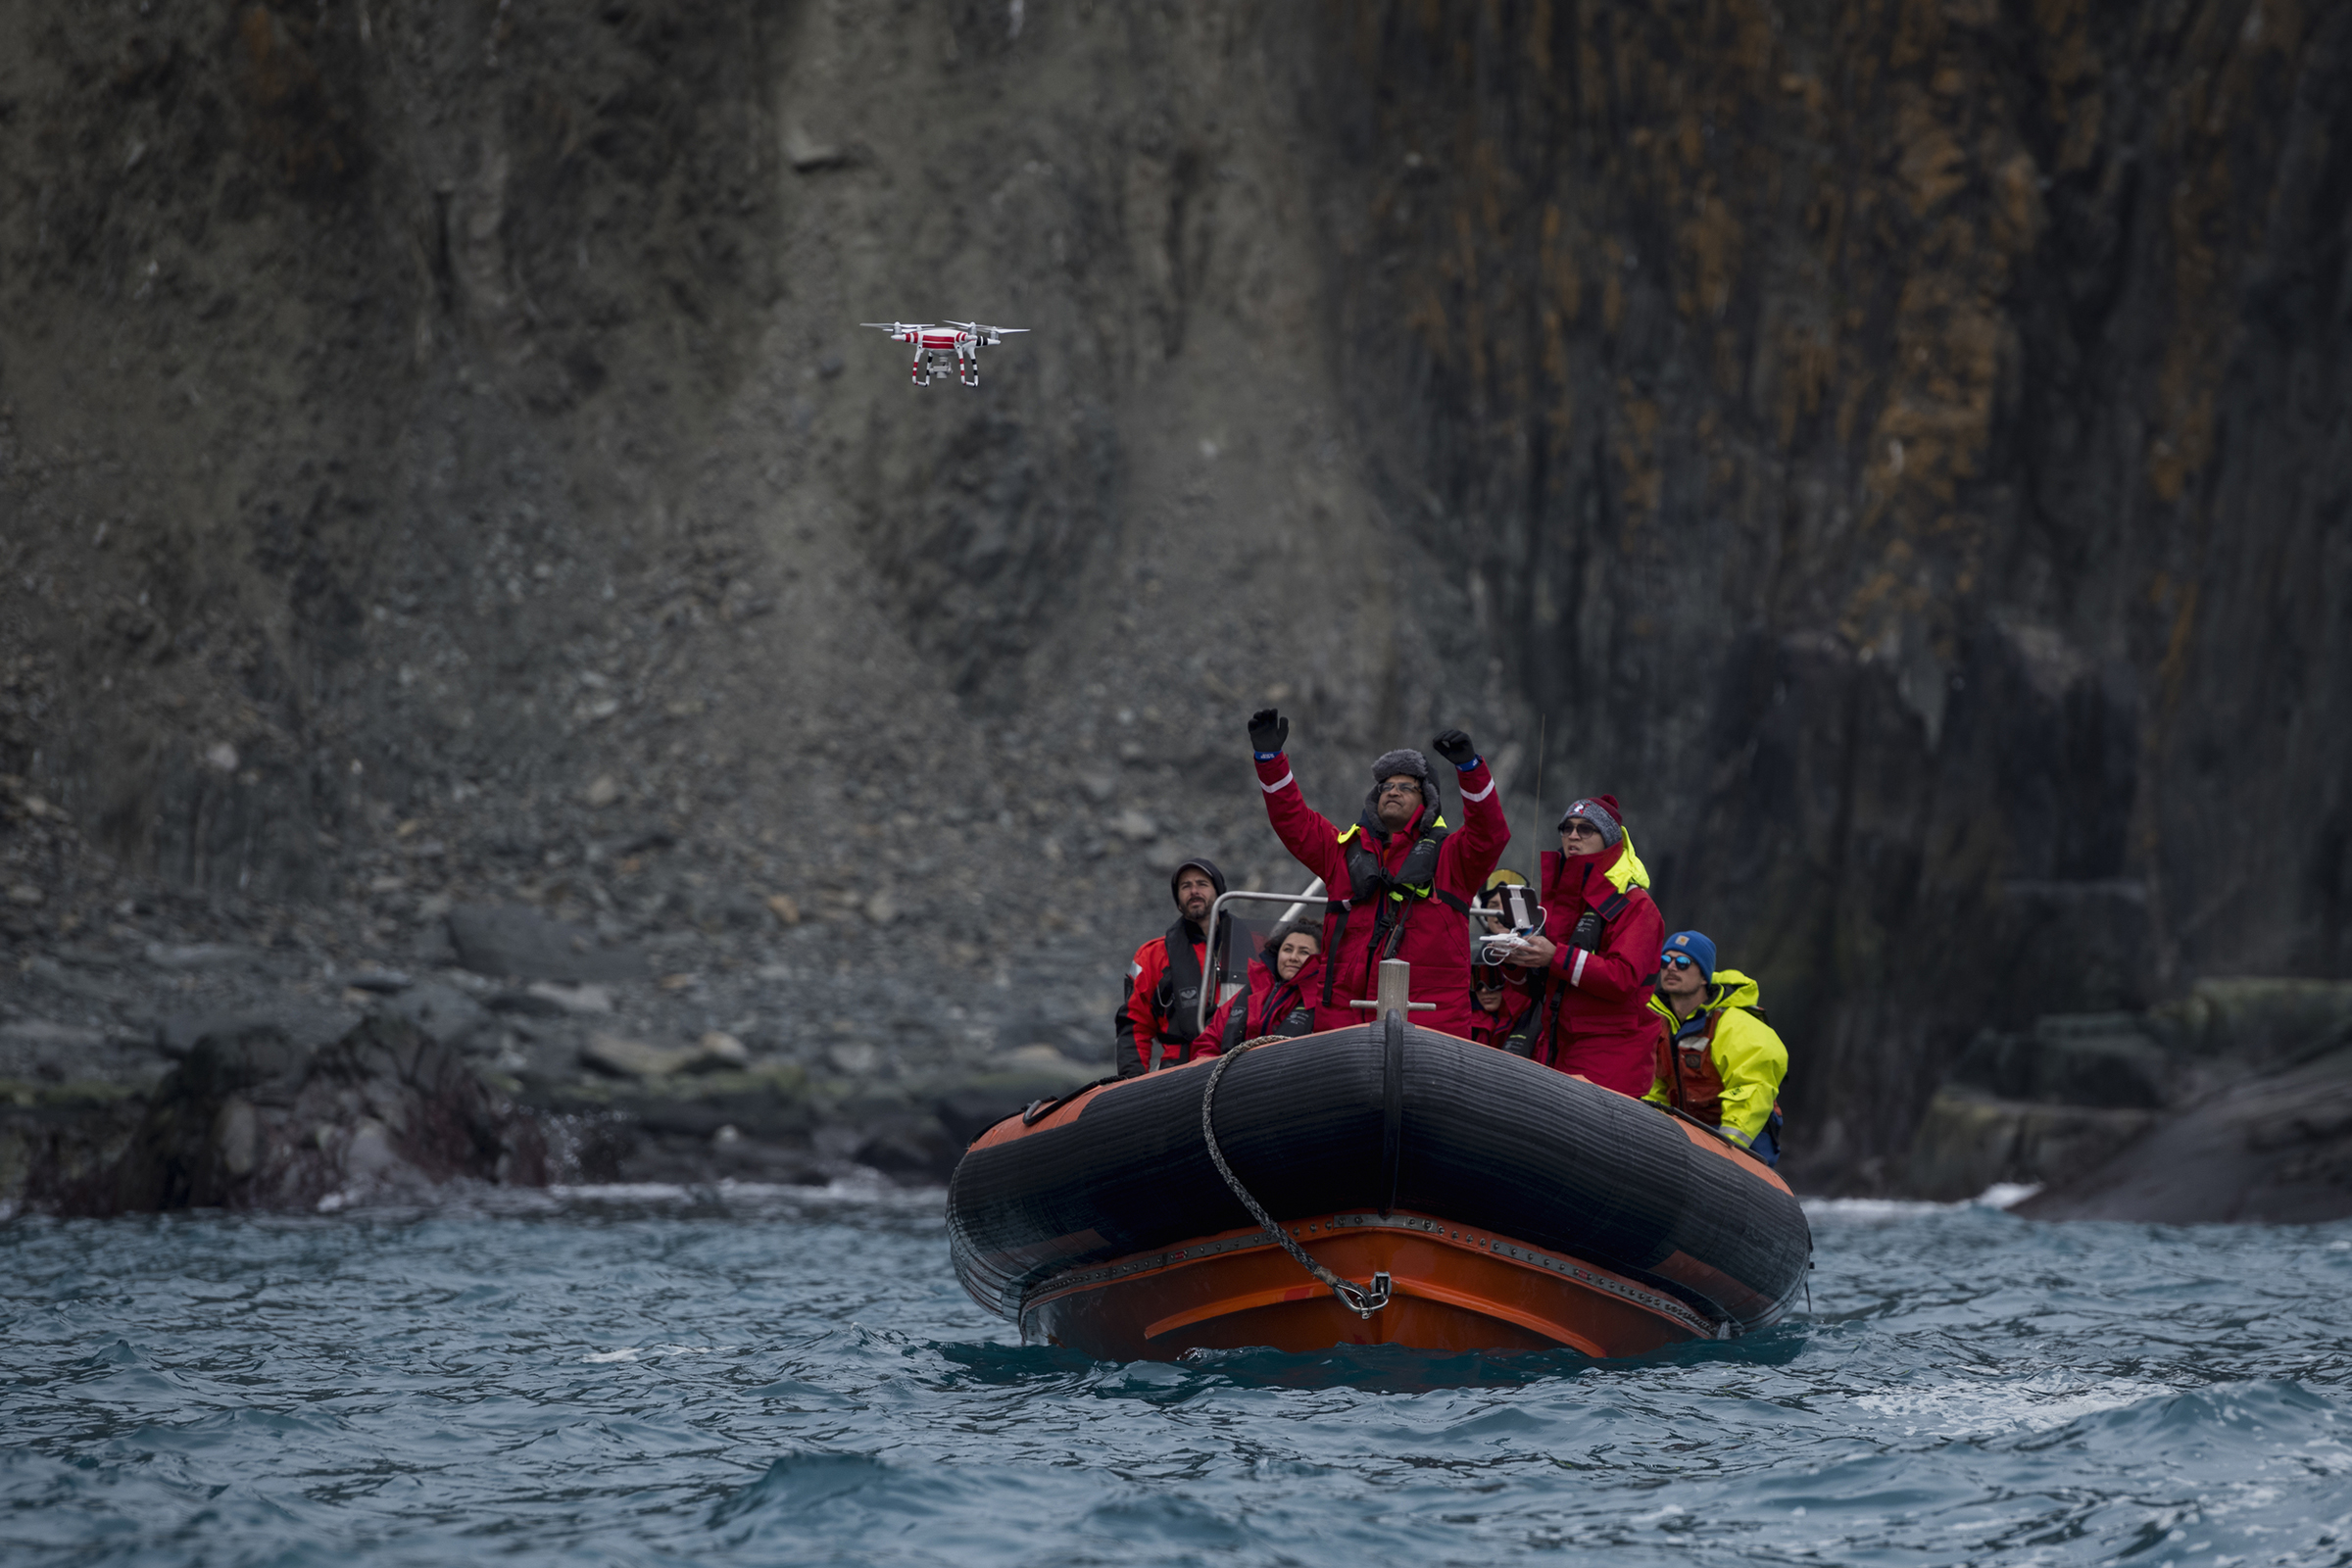 Yang Liu and Vikrant Shah, from North Eastern University, launch a drone from a Greenpeace inflatable. They will later use machine learning to do an automated count of penguin colonies on Elephant Island. The drone counts are later compared to the manual counts done by another team of scientists. (Christian Åslund —Greenpeace and TIME)